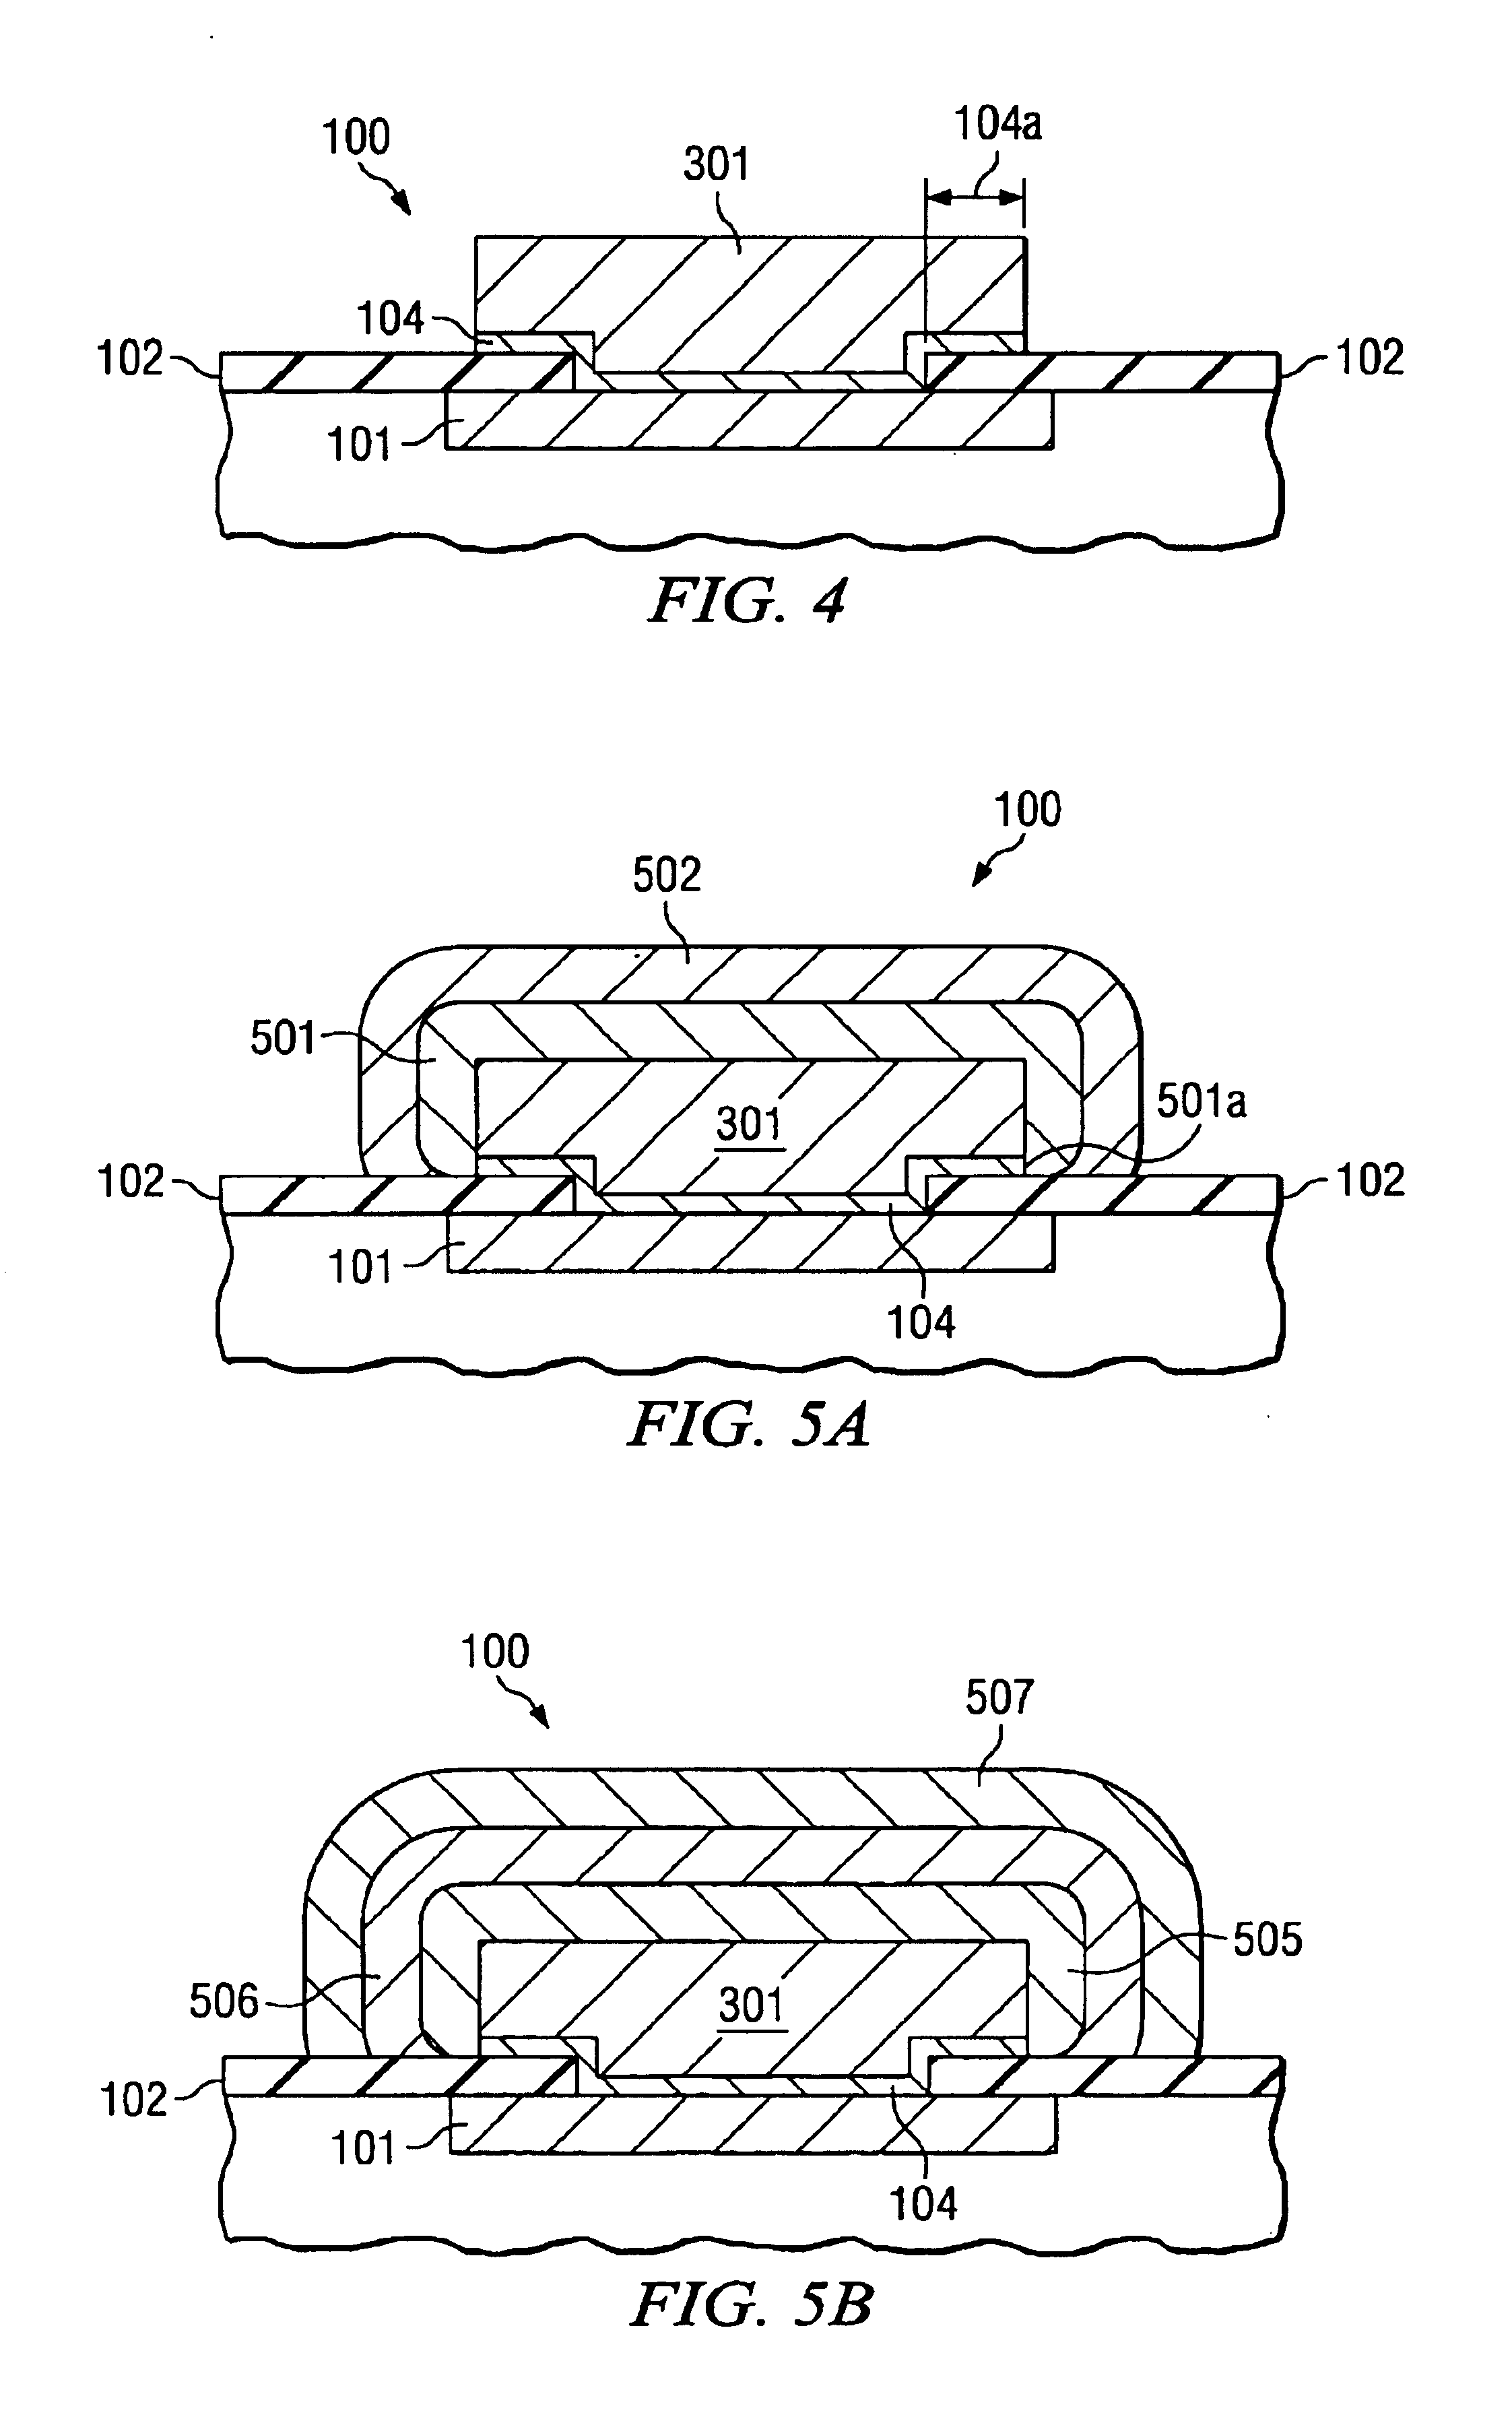 Sealing and protecting integrated circuit bonding pads